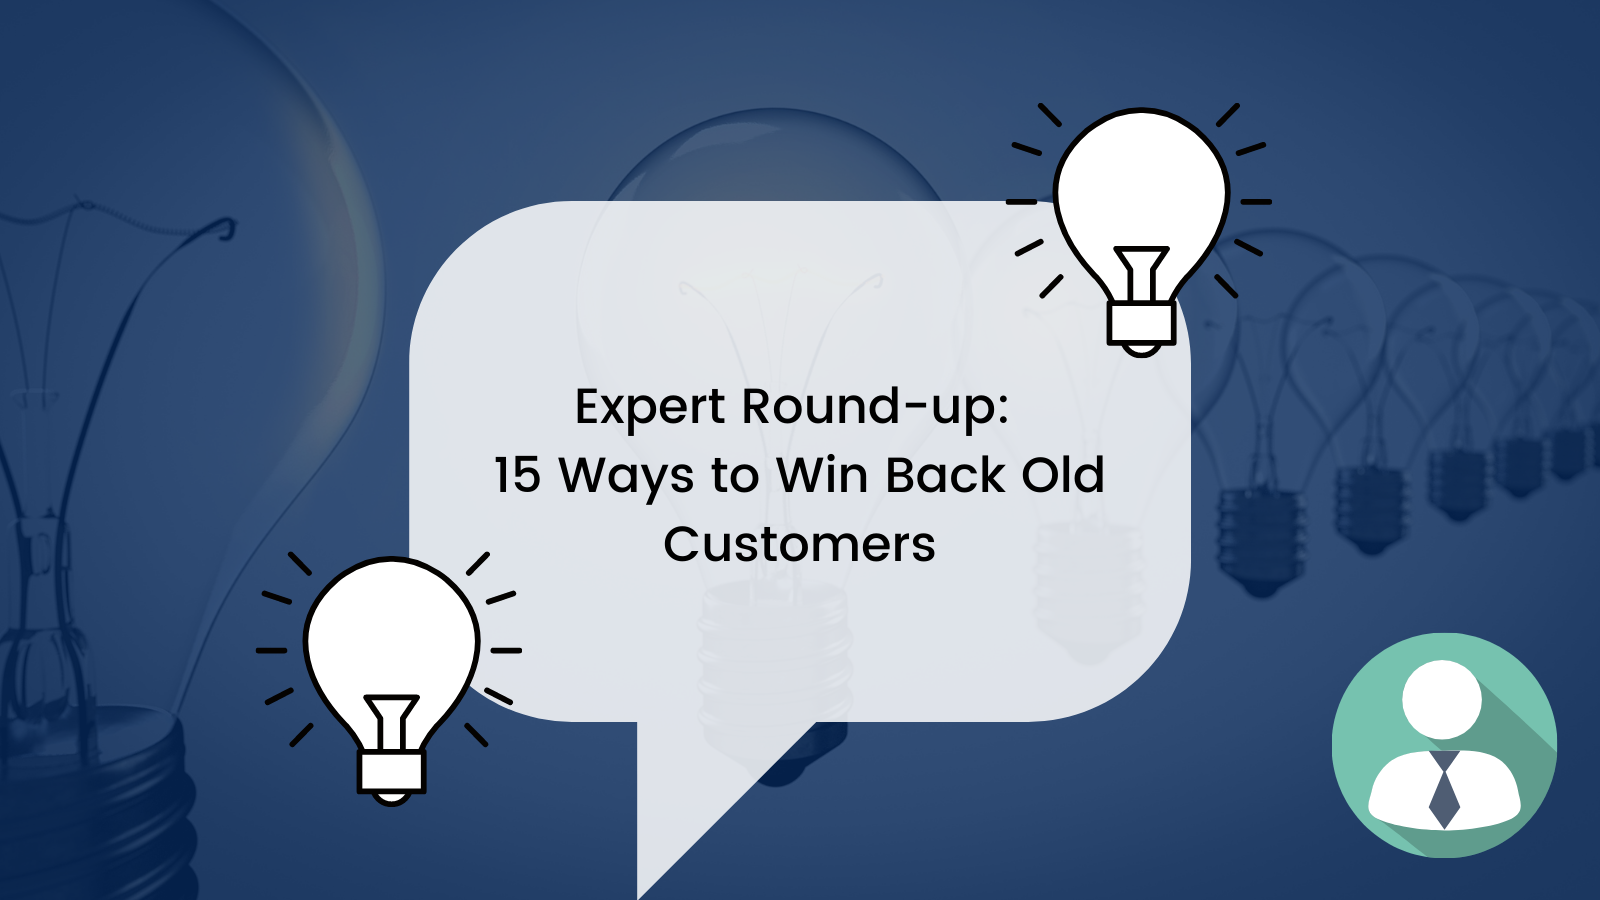 How to Win Back Old Customers: 15 Winback Strategies